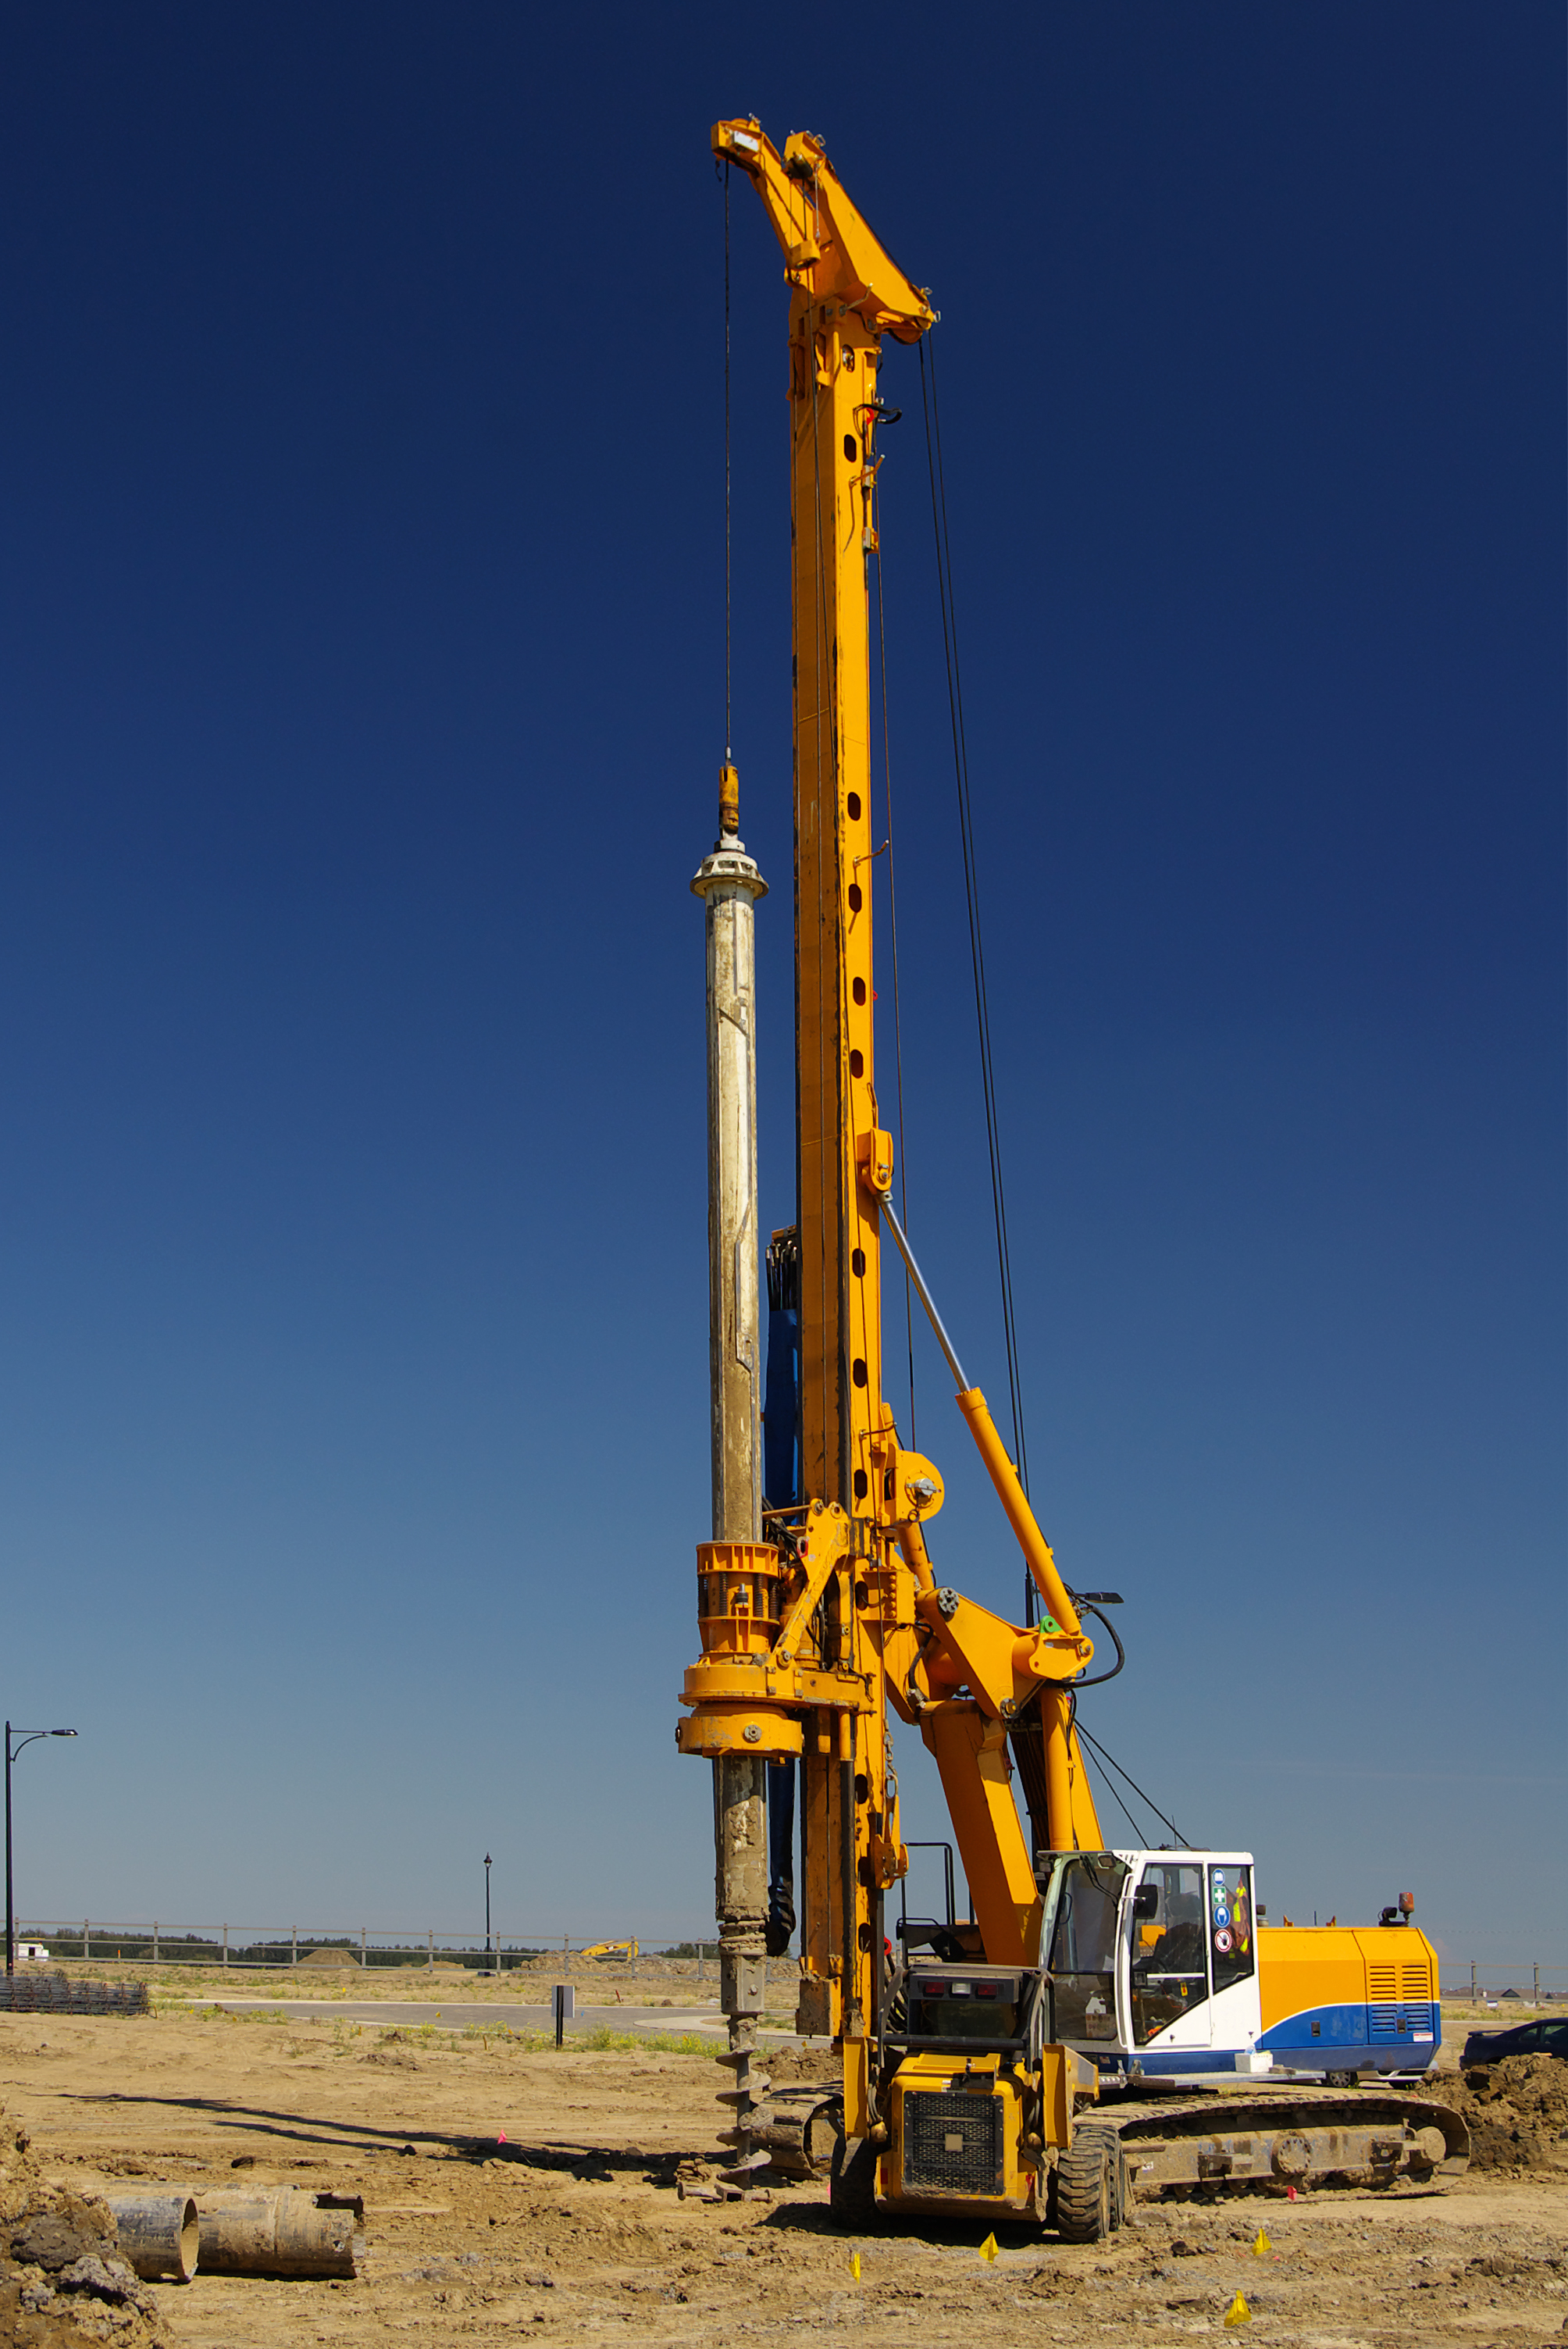 An industrial rotary drill used to create holes for footings and pilings